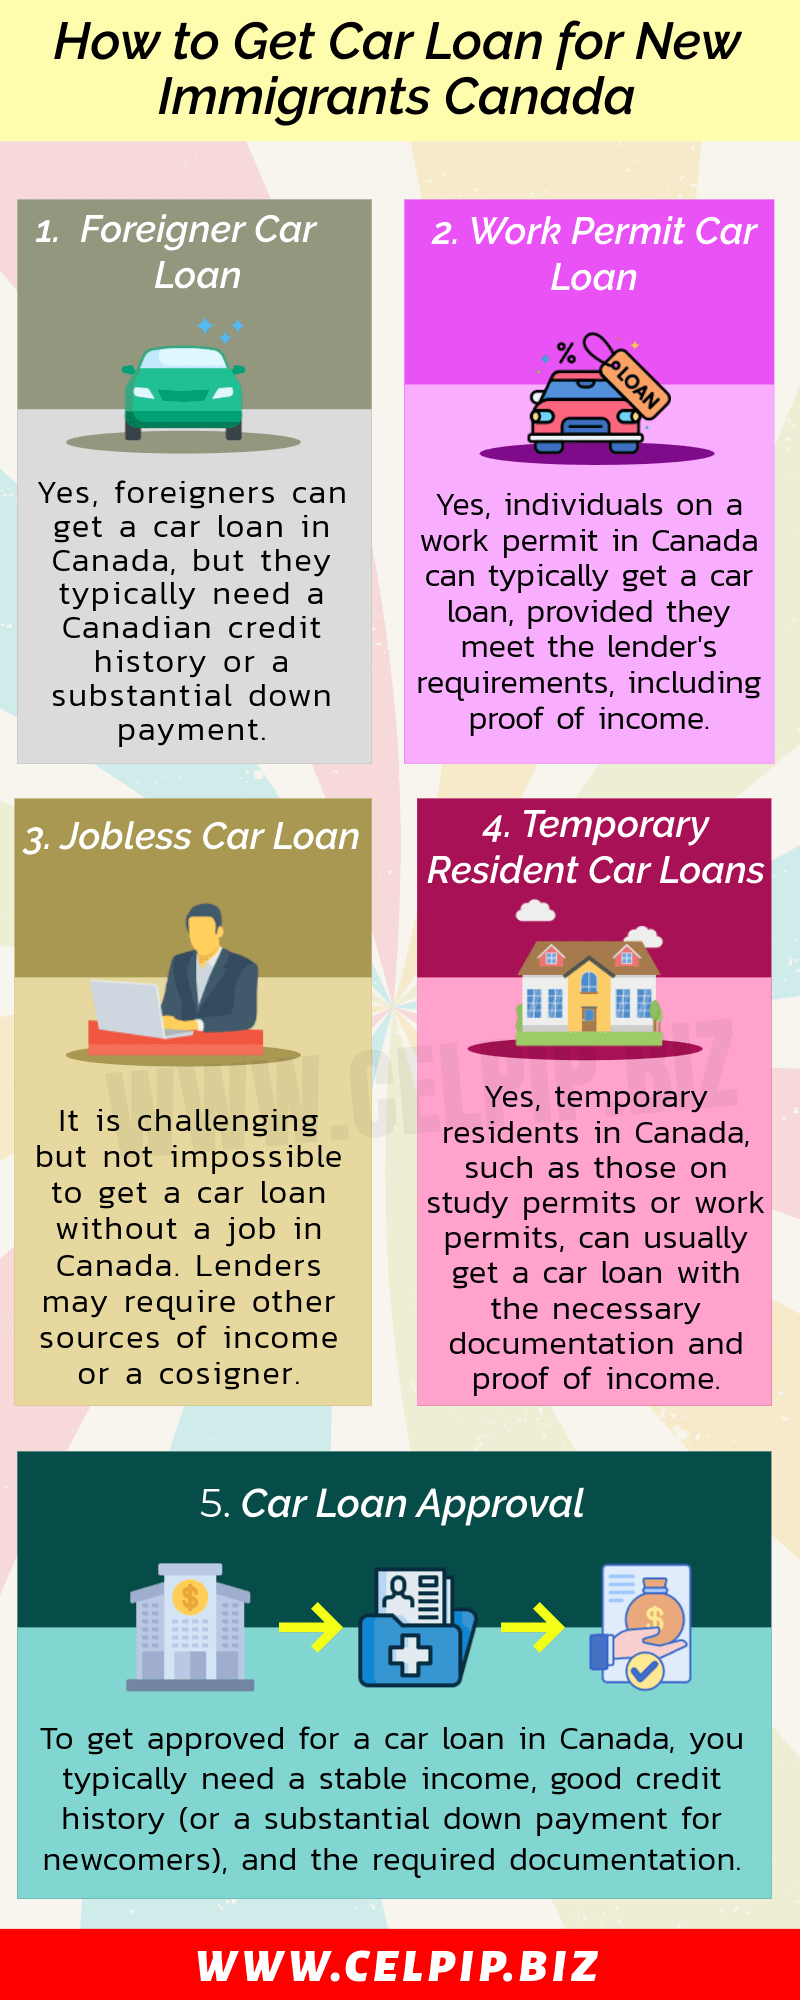 Car Loan for New Immigrants